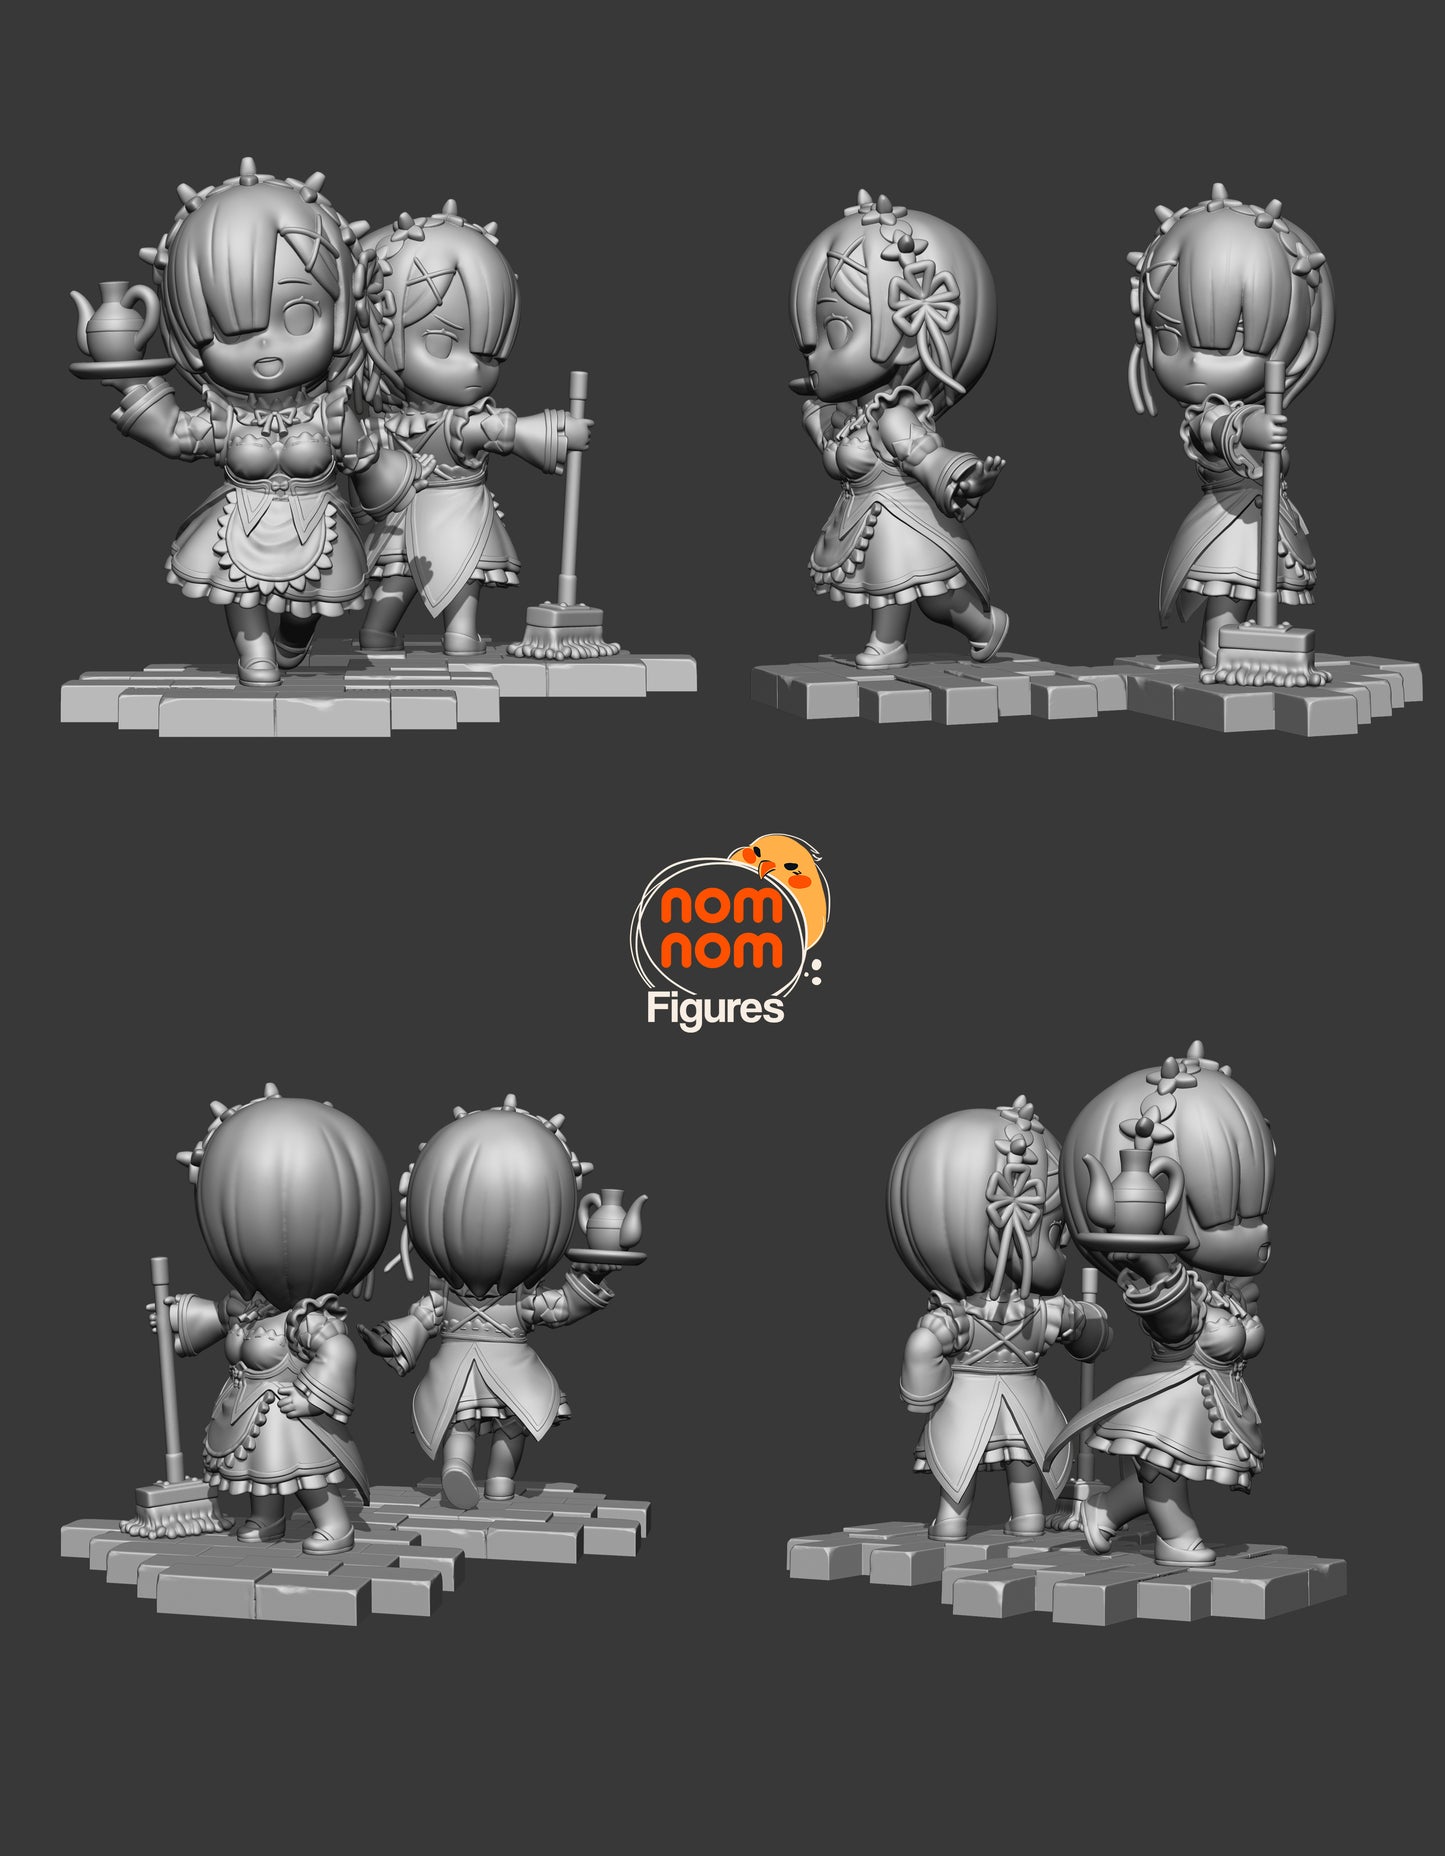 Chibi Twin Maids  by NomNom Figures